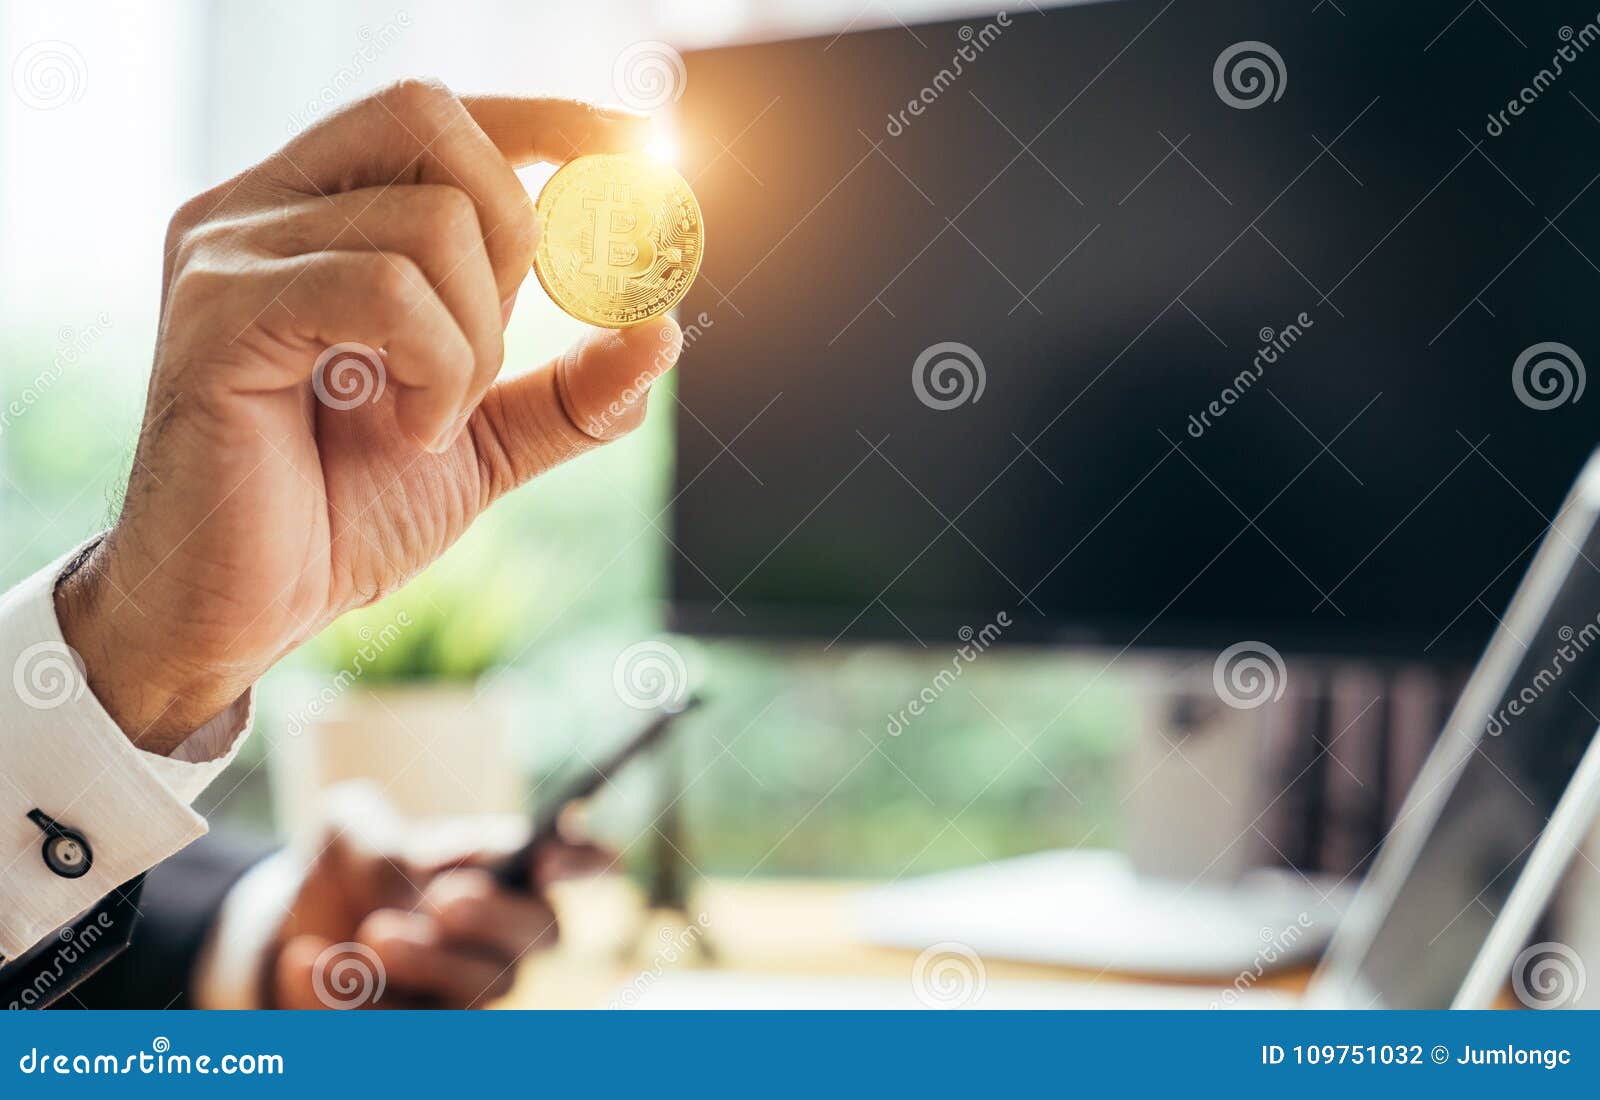 a busines man is holding a gold bitcoin